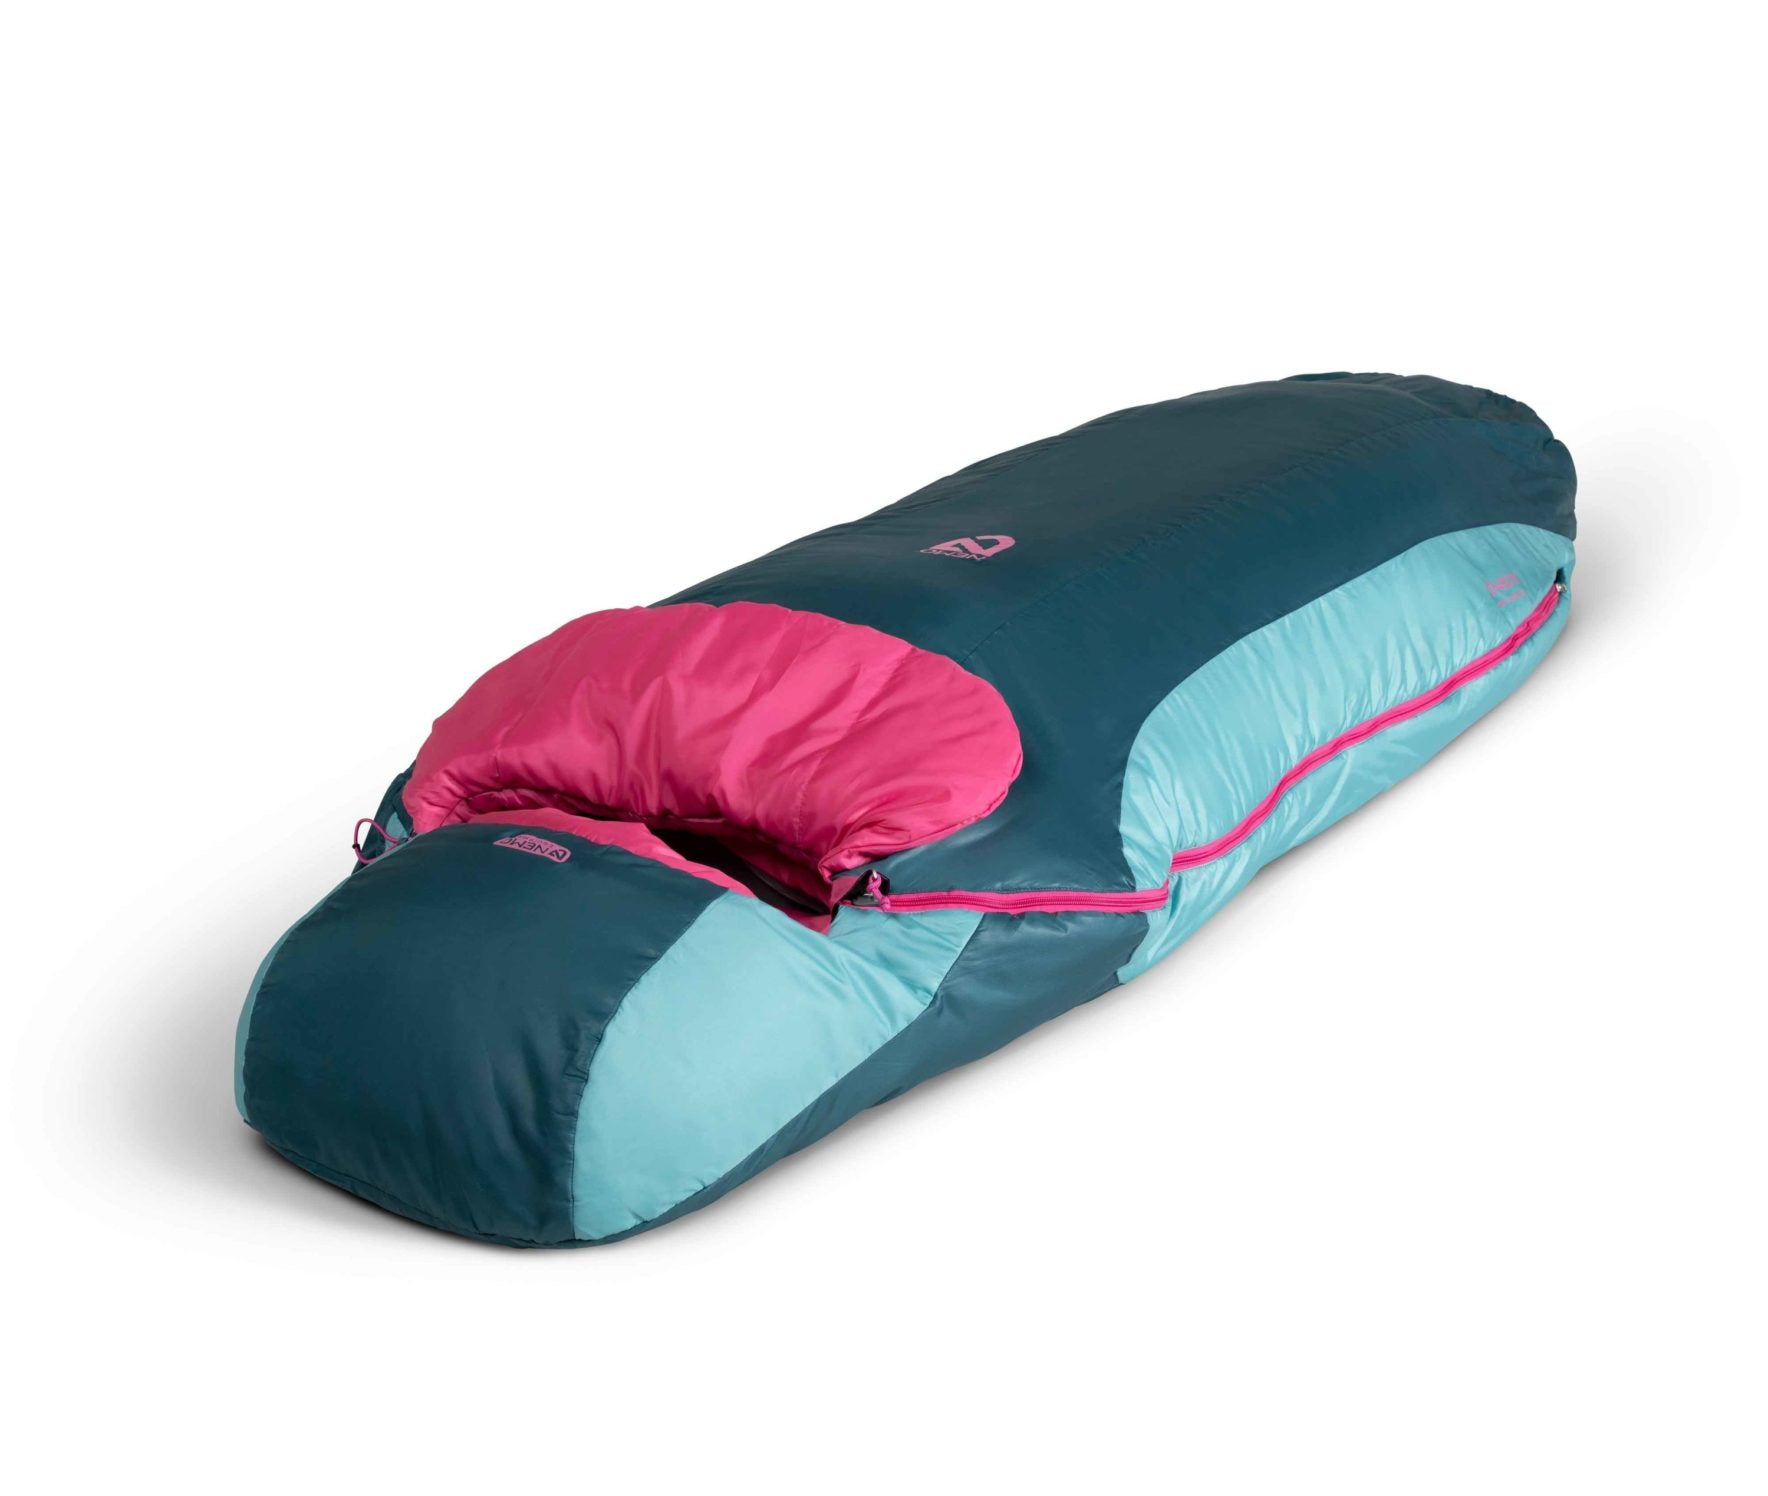 Tempo™ Women's Synthetic Sleeping Bag 35º - Discontinued